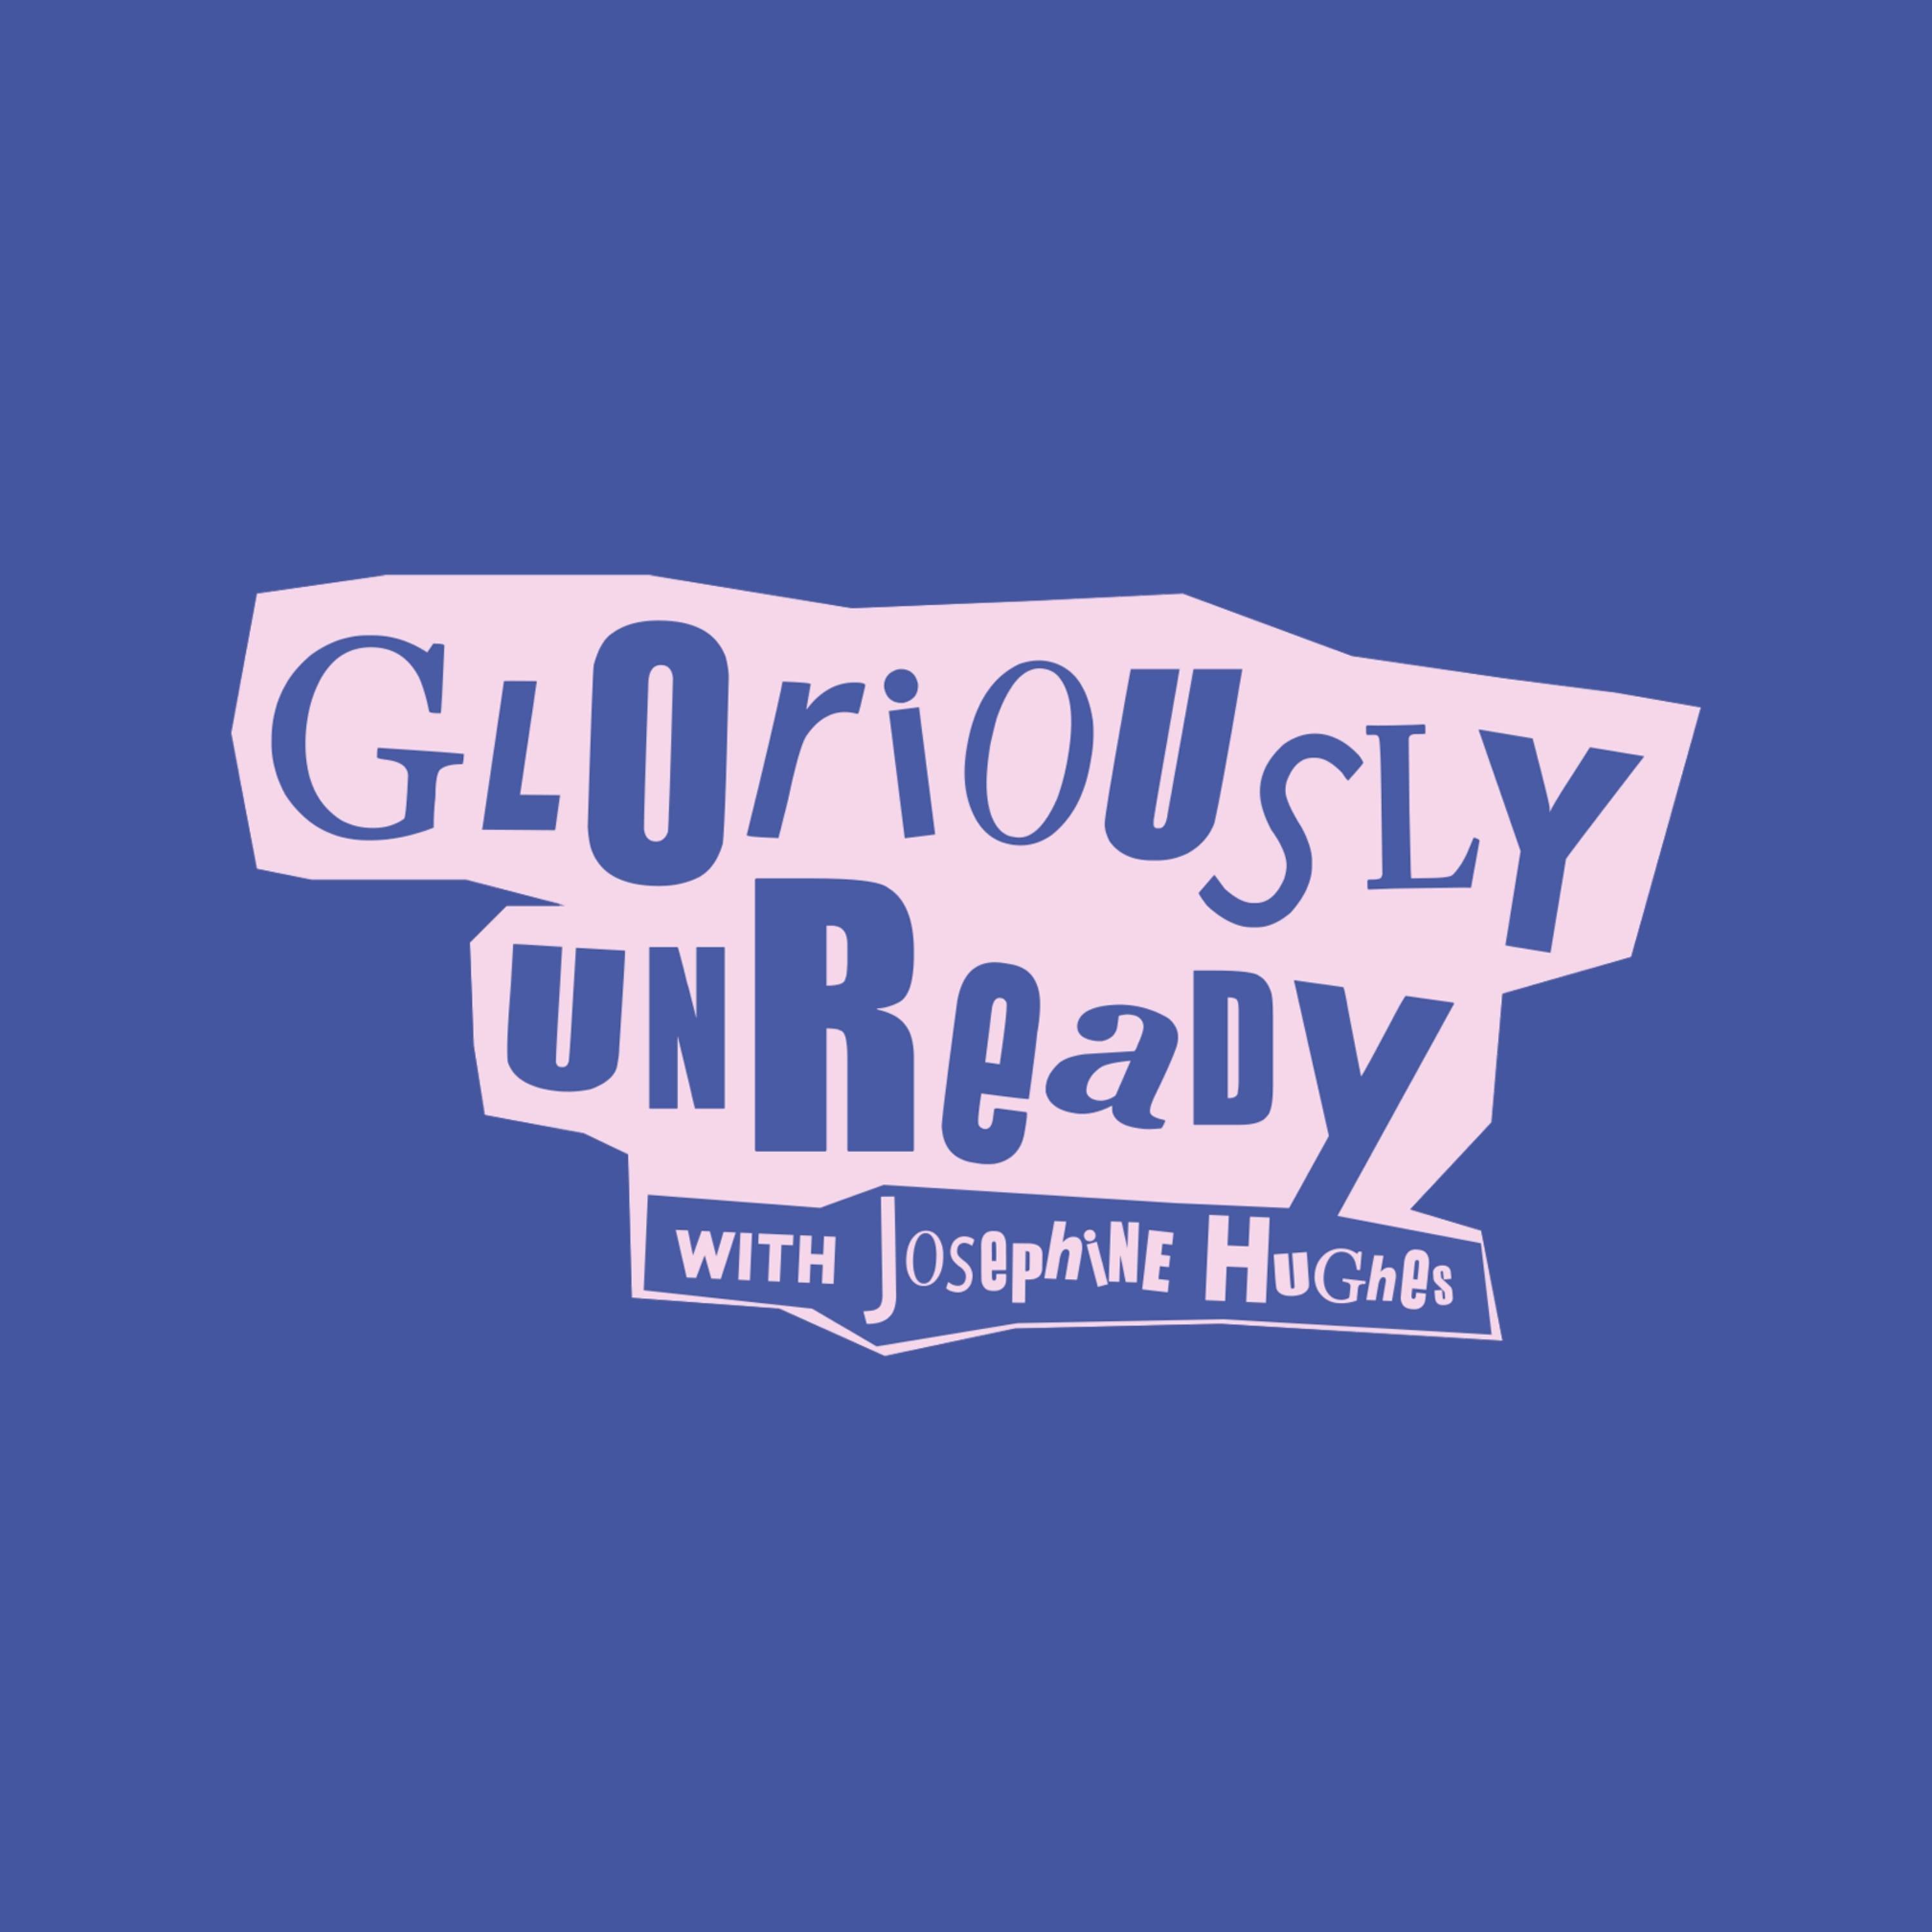 Artwork for Gloriously Unready